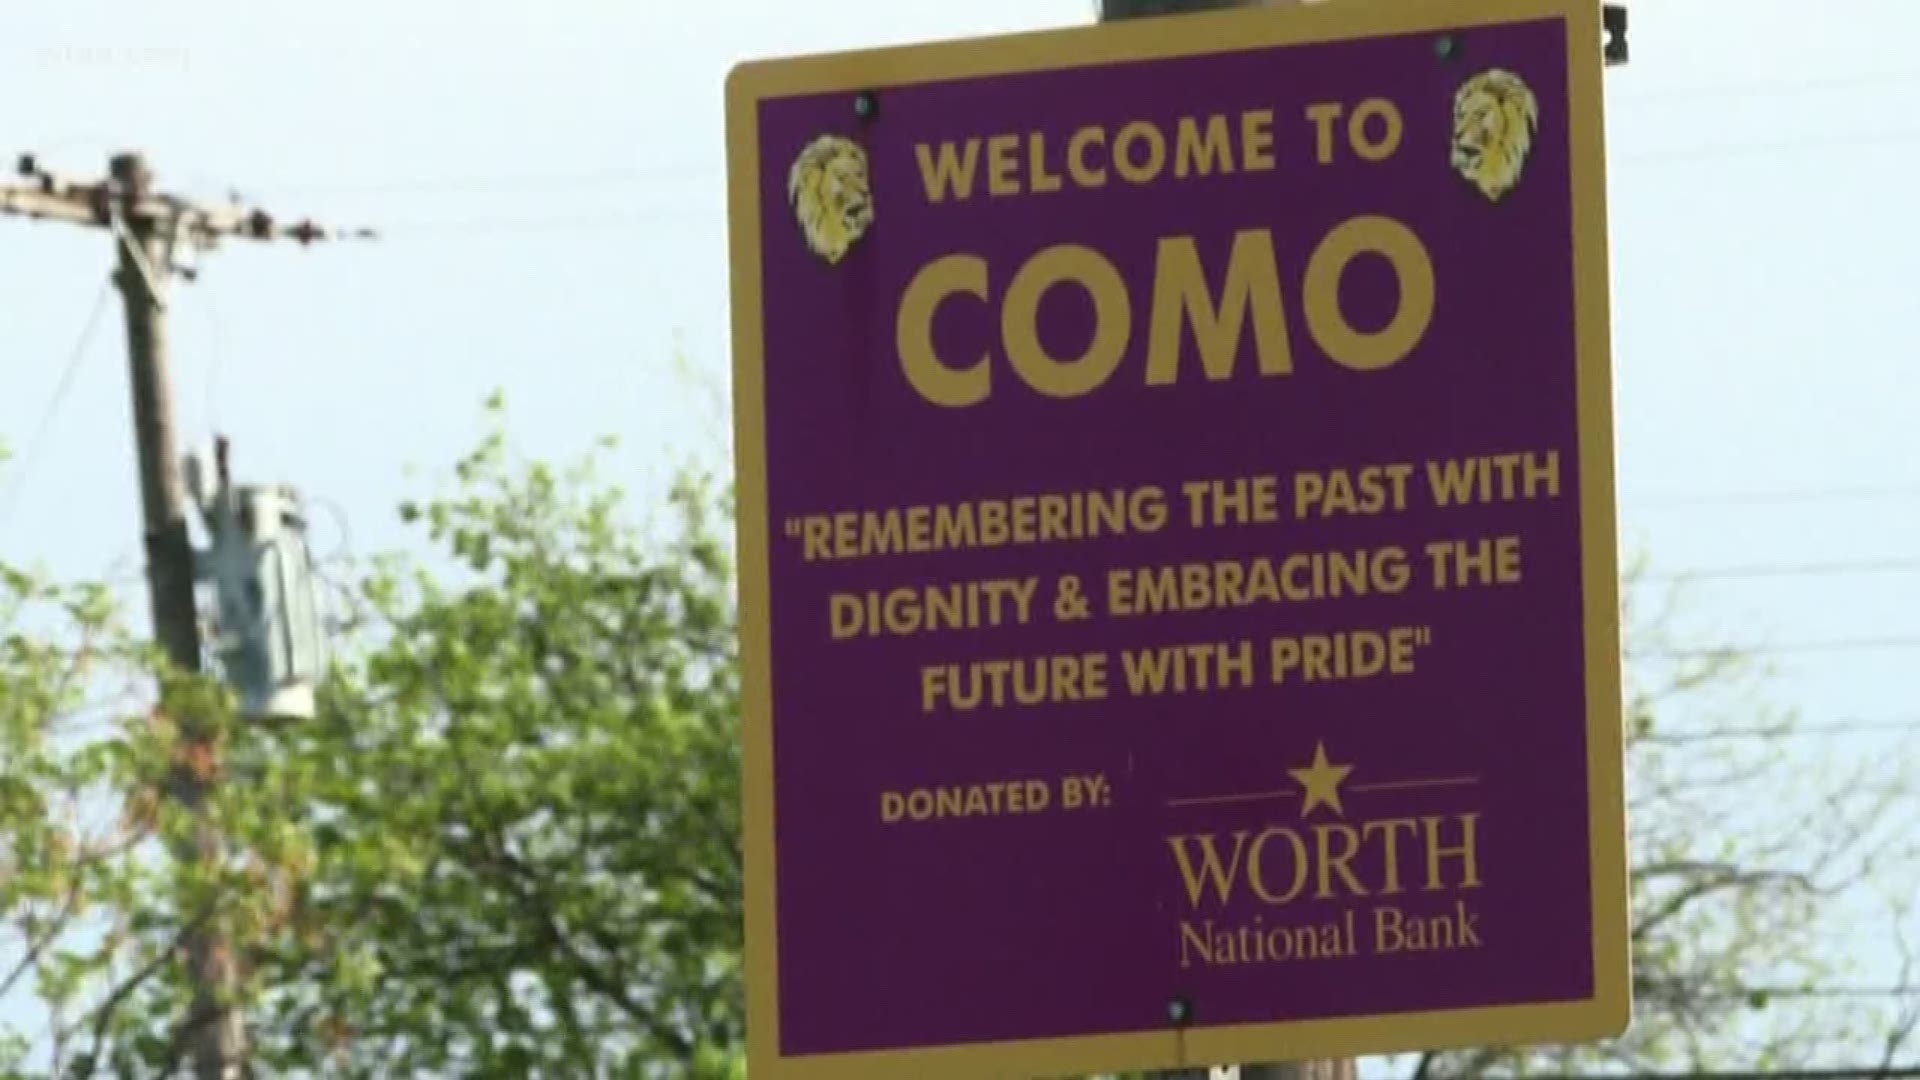 Fort Worth shooting: What is Como? What is Comofest? | wfaa.com